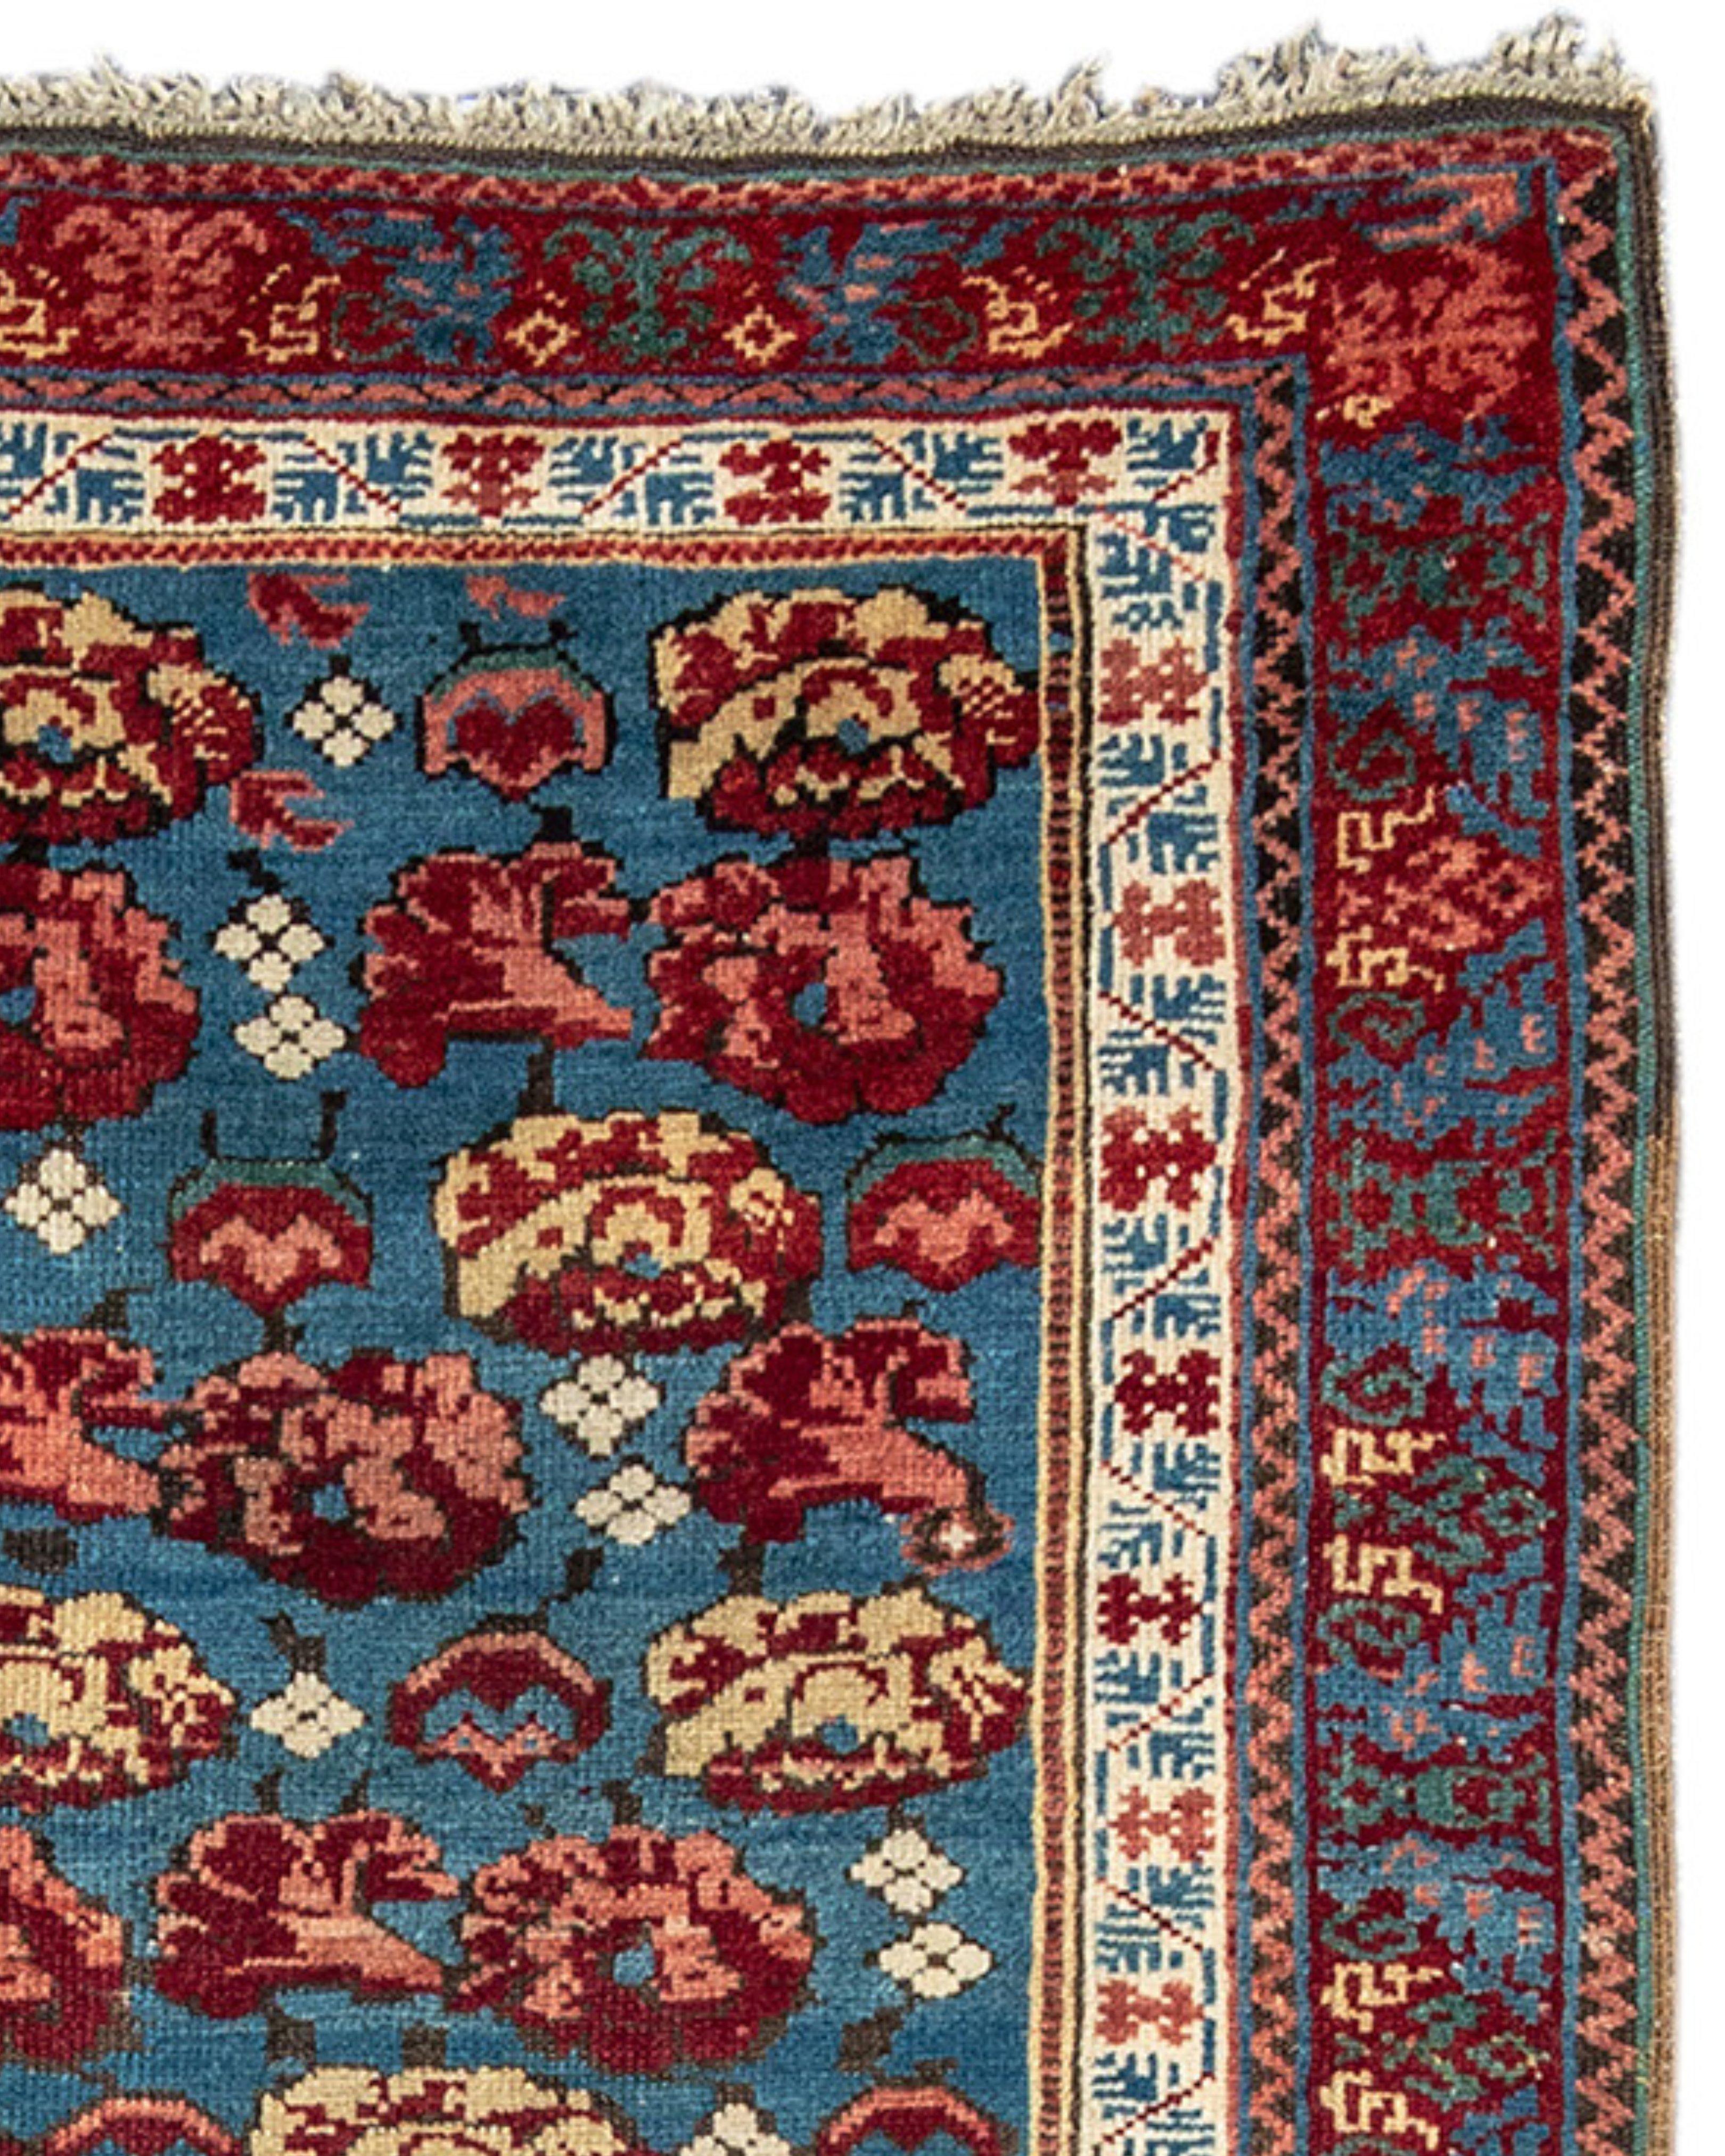 Seichour Kuba Rug, 19th Century In Excellent Condition For Sale In San Francisco, CA